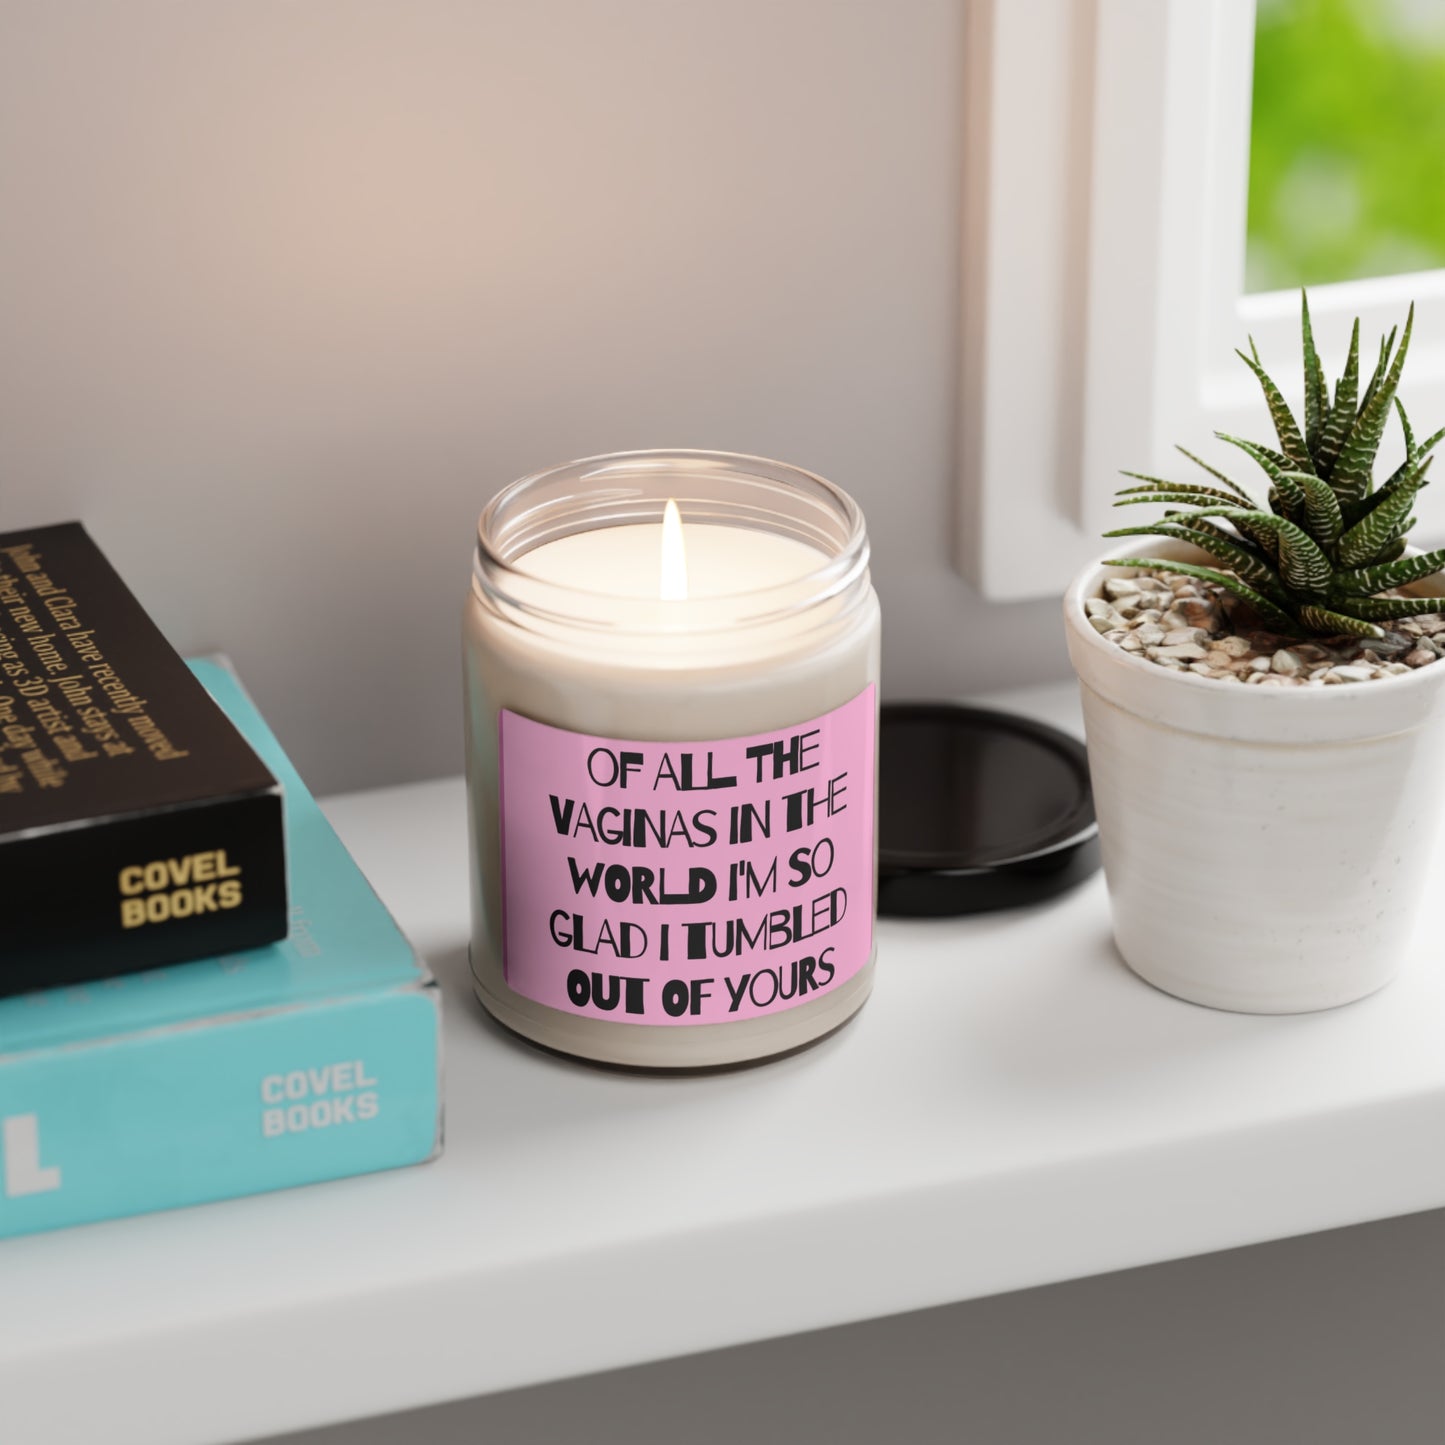 Funny Mother's Day Candle